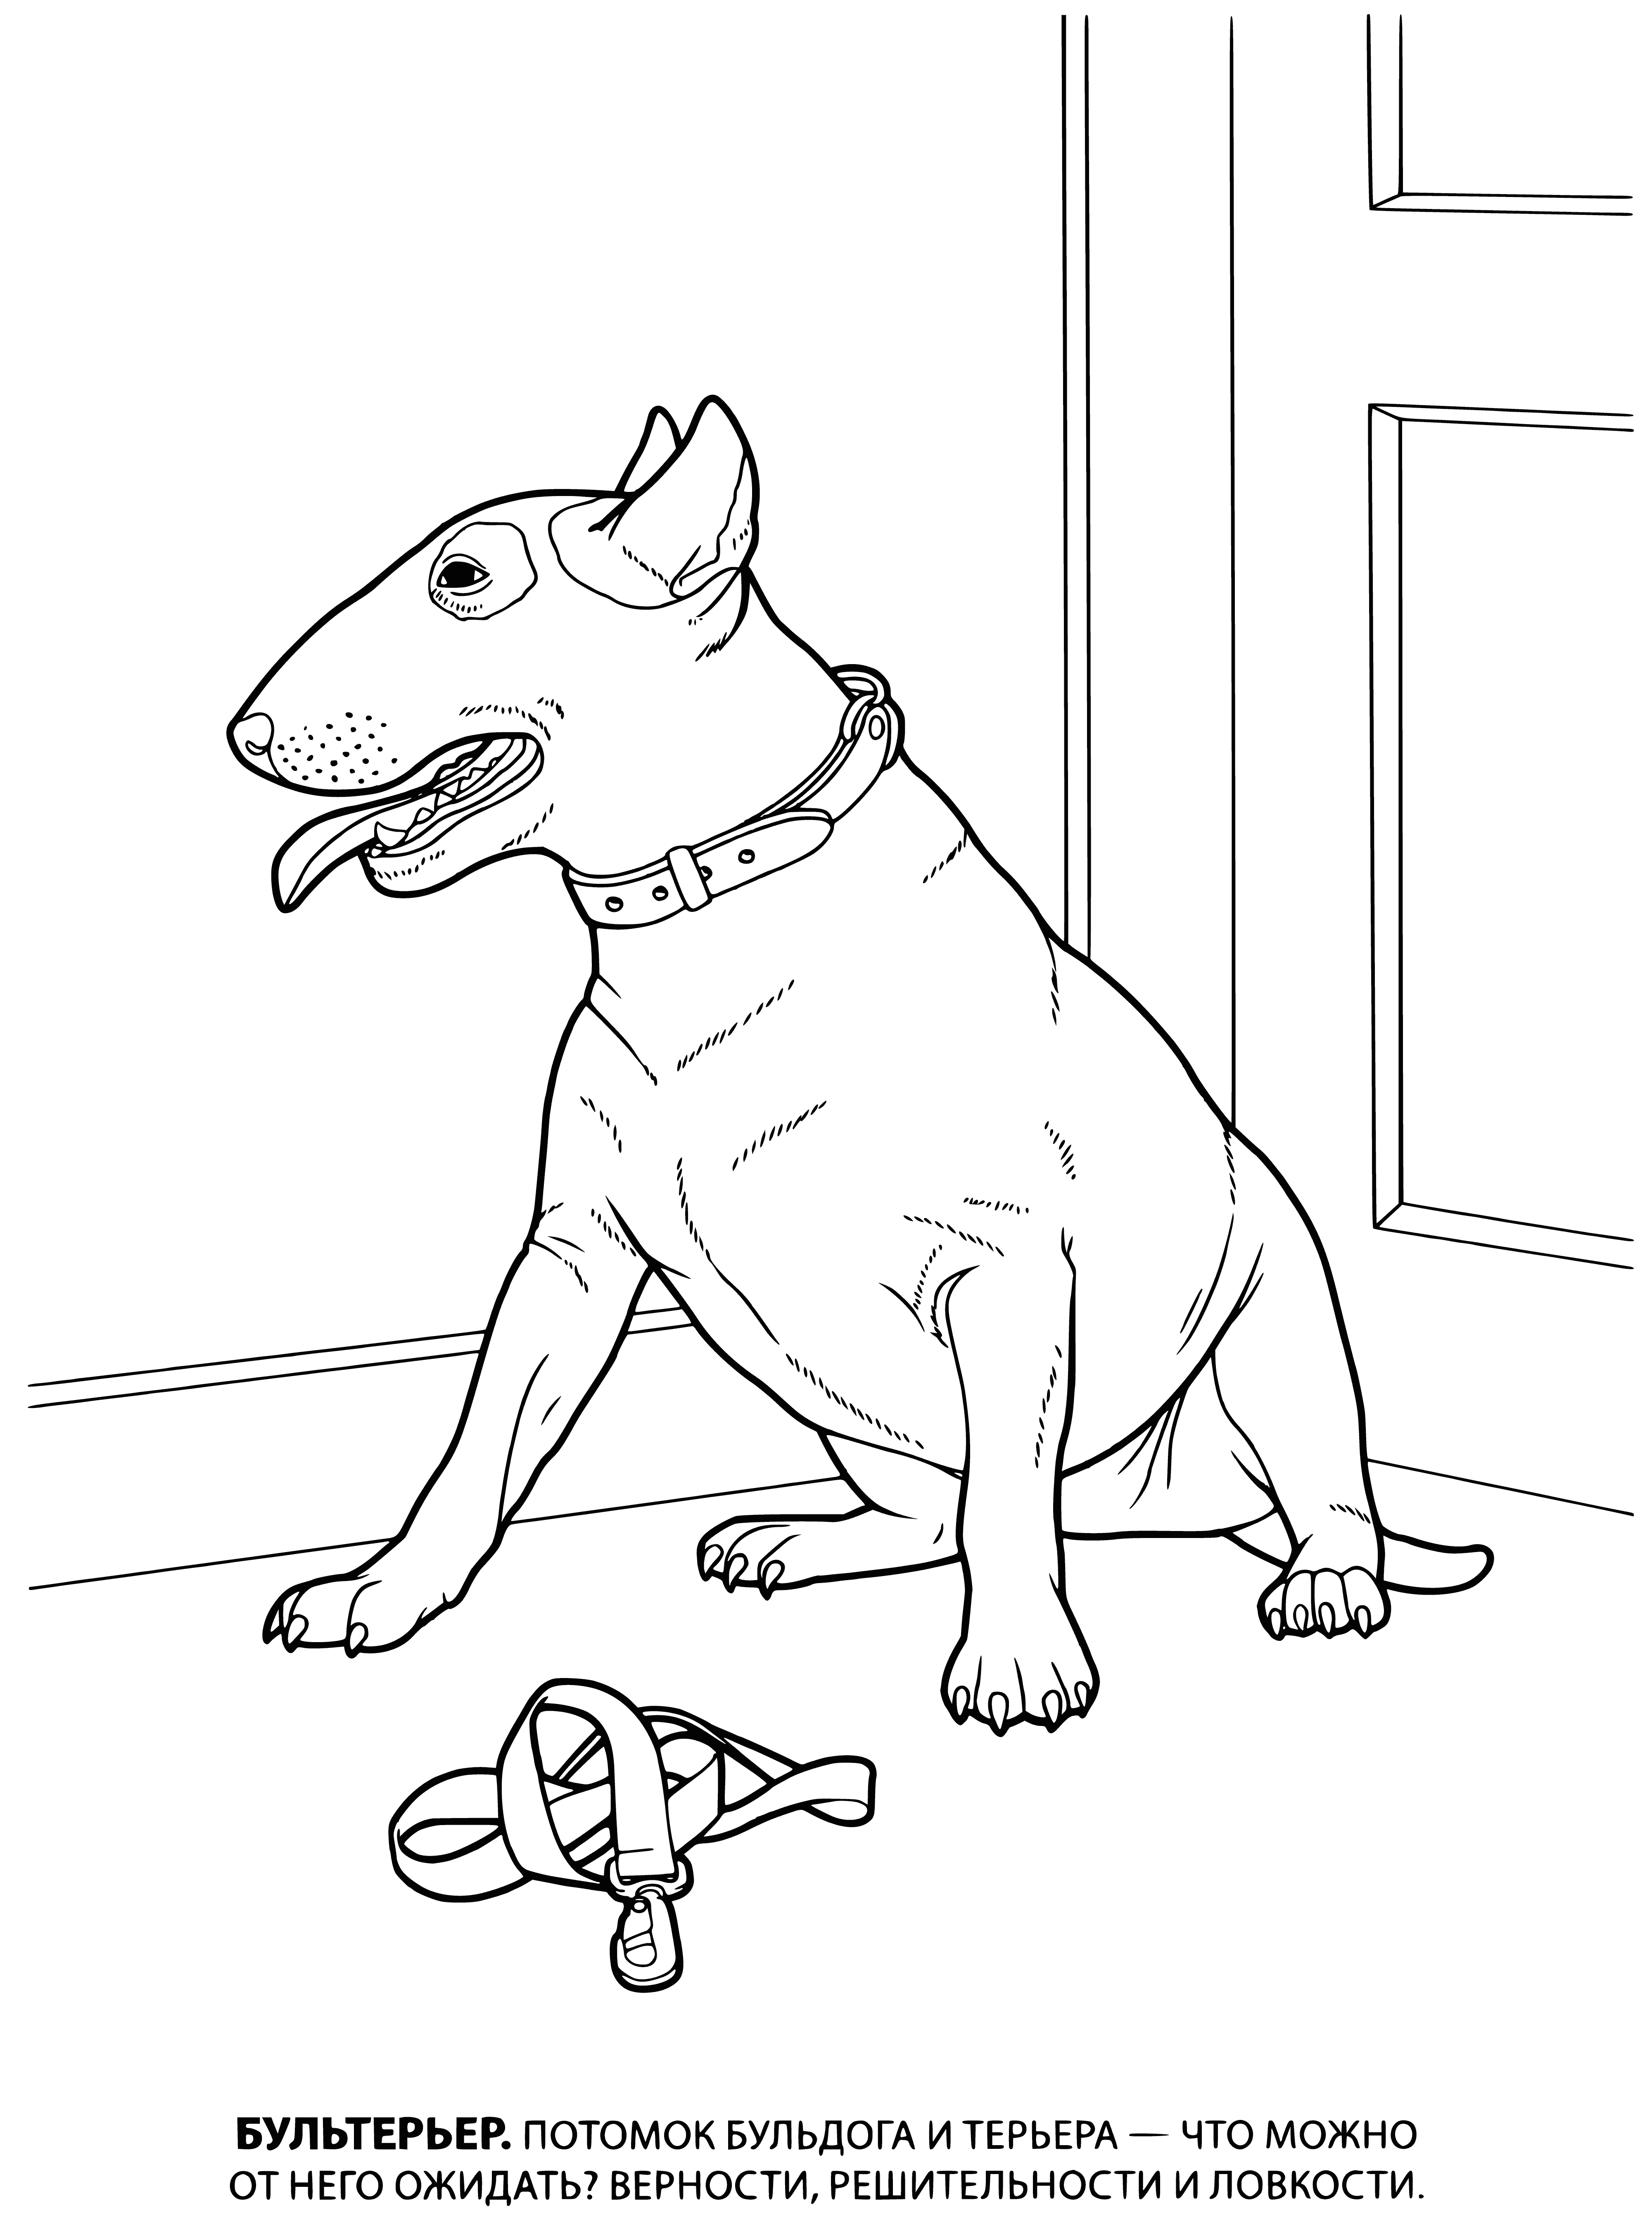 coloring page: Bull Terrier coloring page: Large, muscular dog w/short, coarse coat white w/black patches, large round head, short muzzle, small eyes, small erect ears & short thick tail.